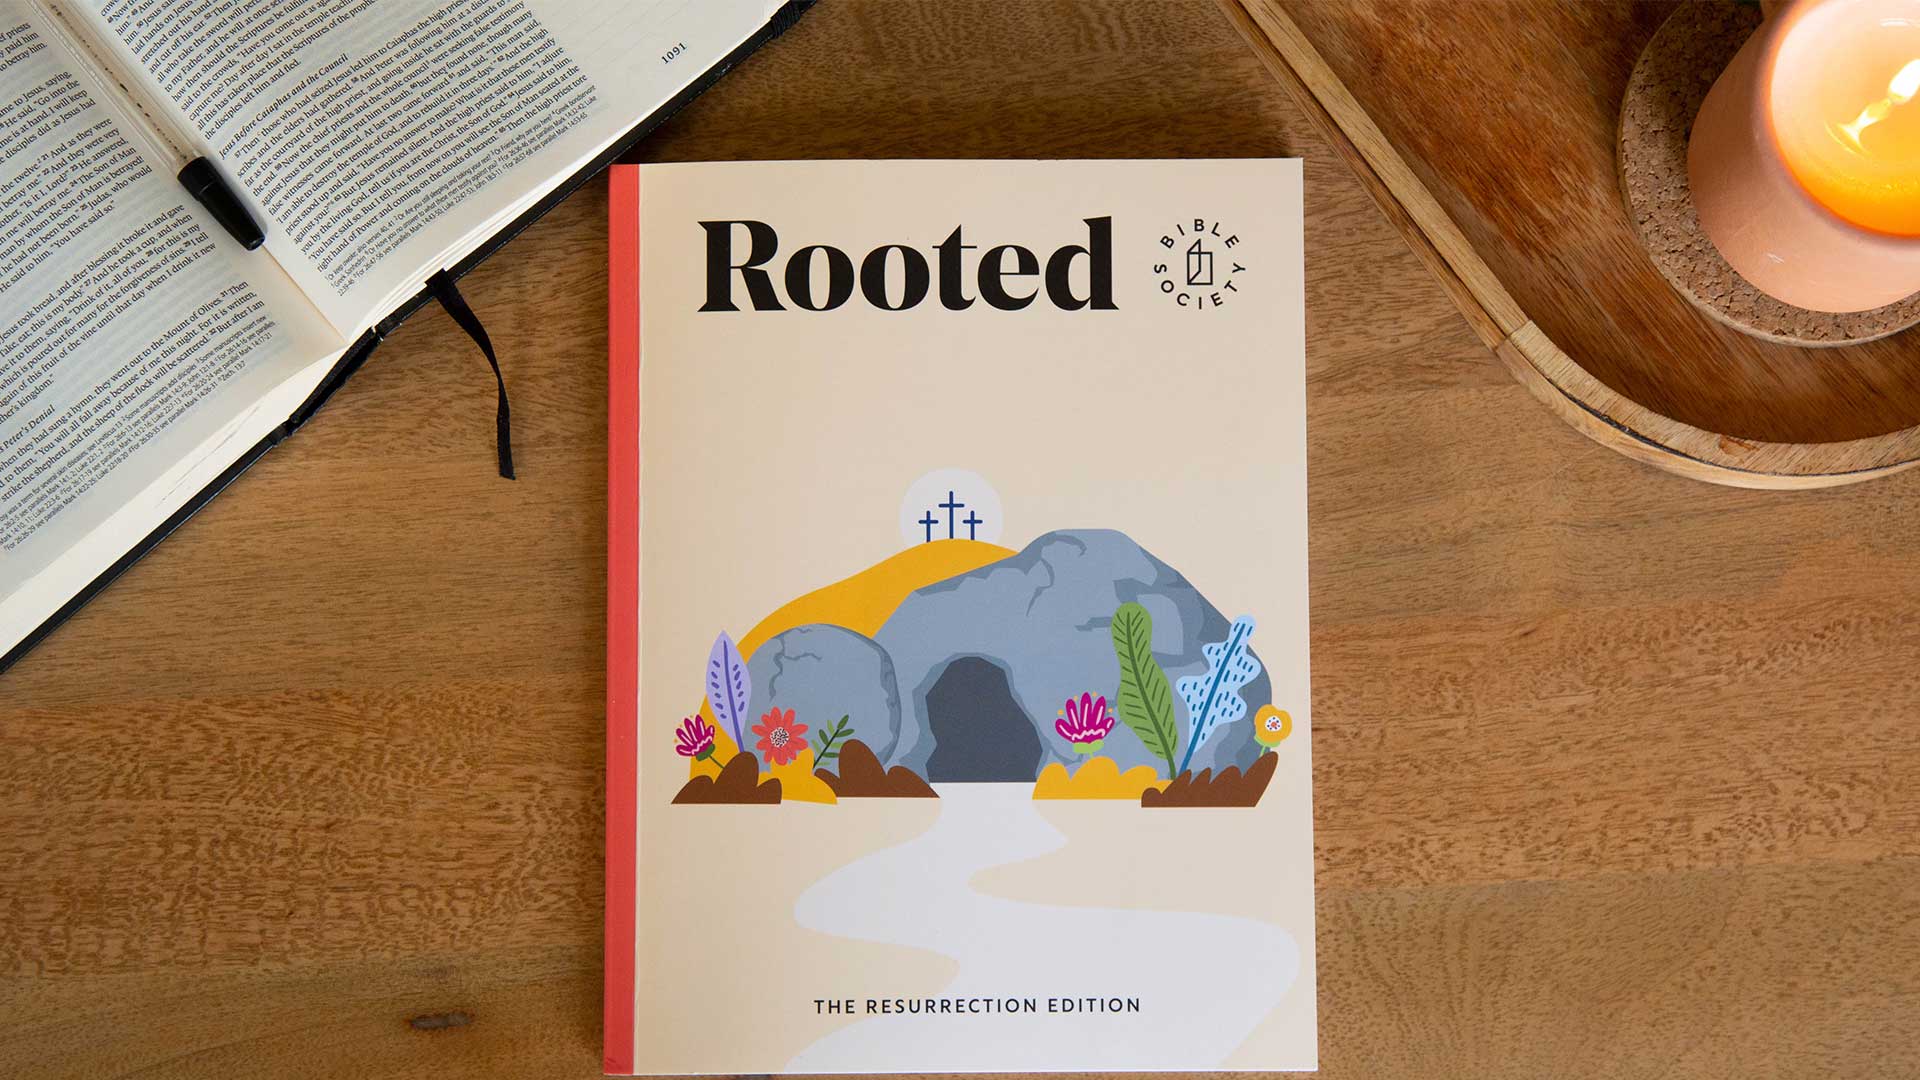 Get your copy of the Rooted Resurrection Journal while stock lasts